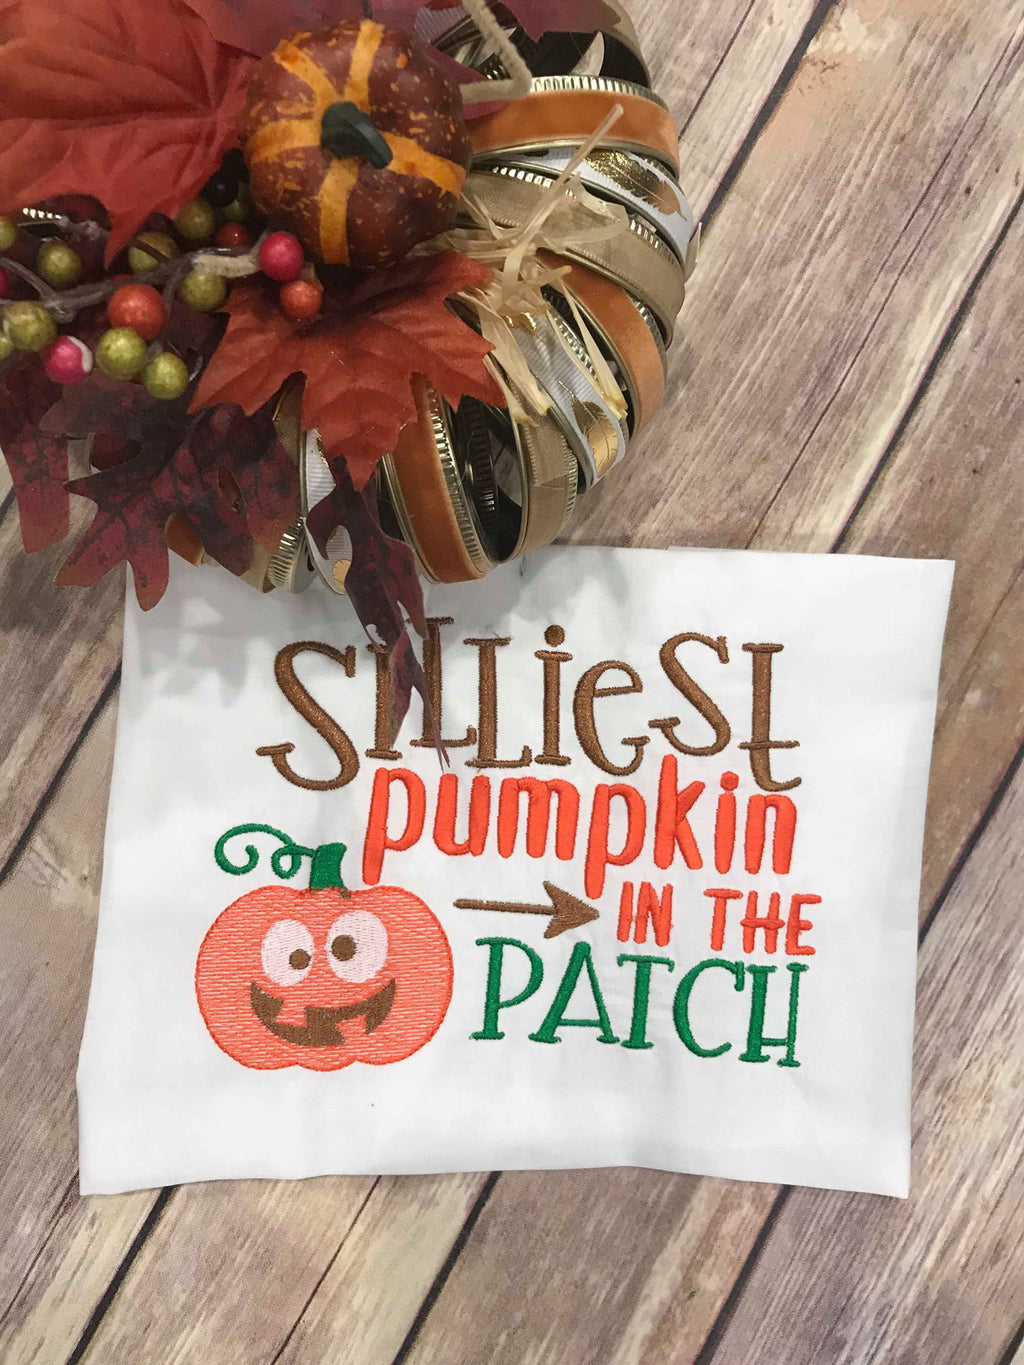 Sketchy Silliest Pumpkin in the Patch machine embroidery design 7x11